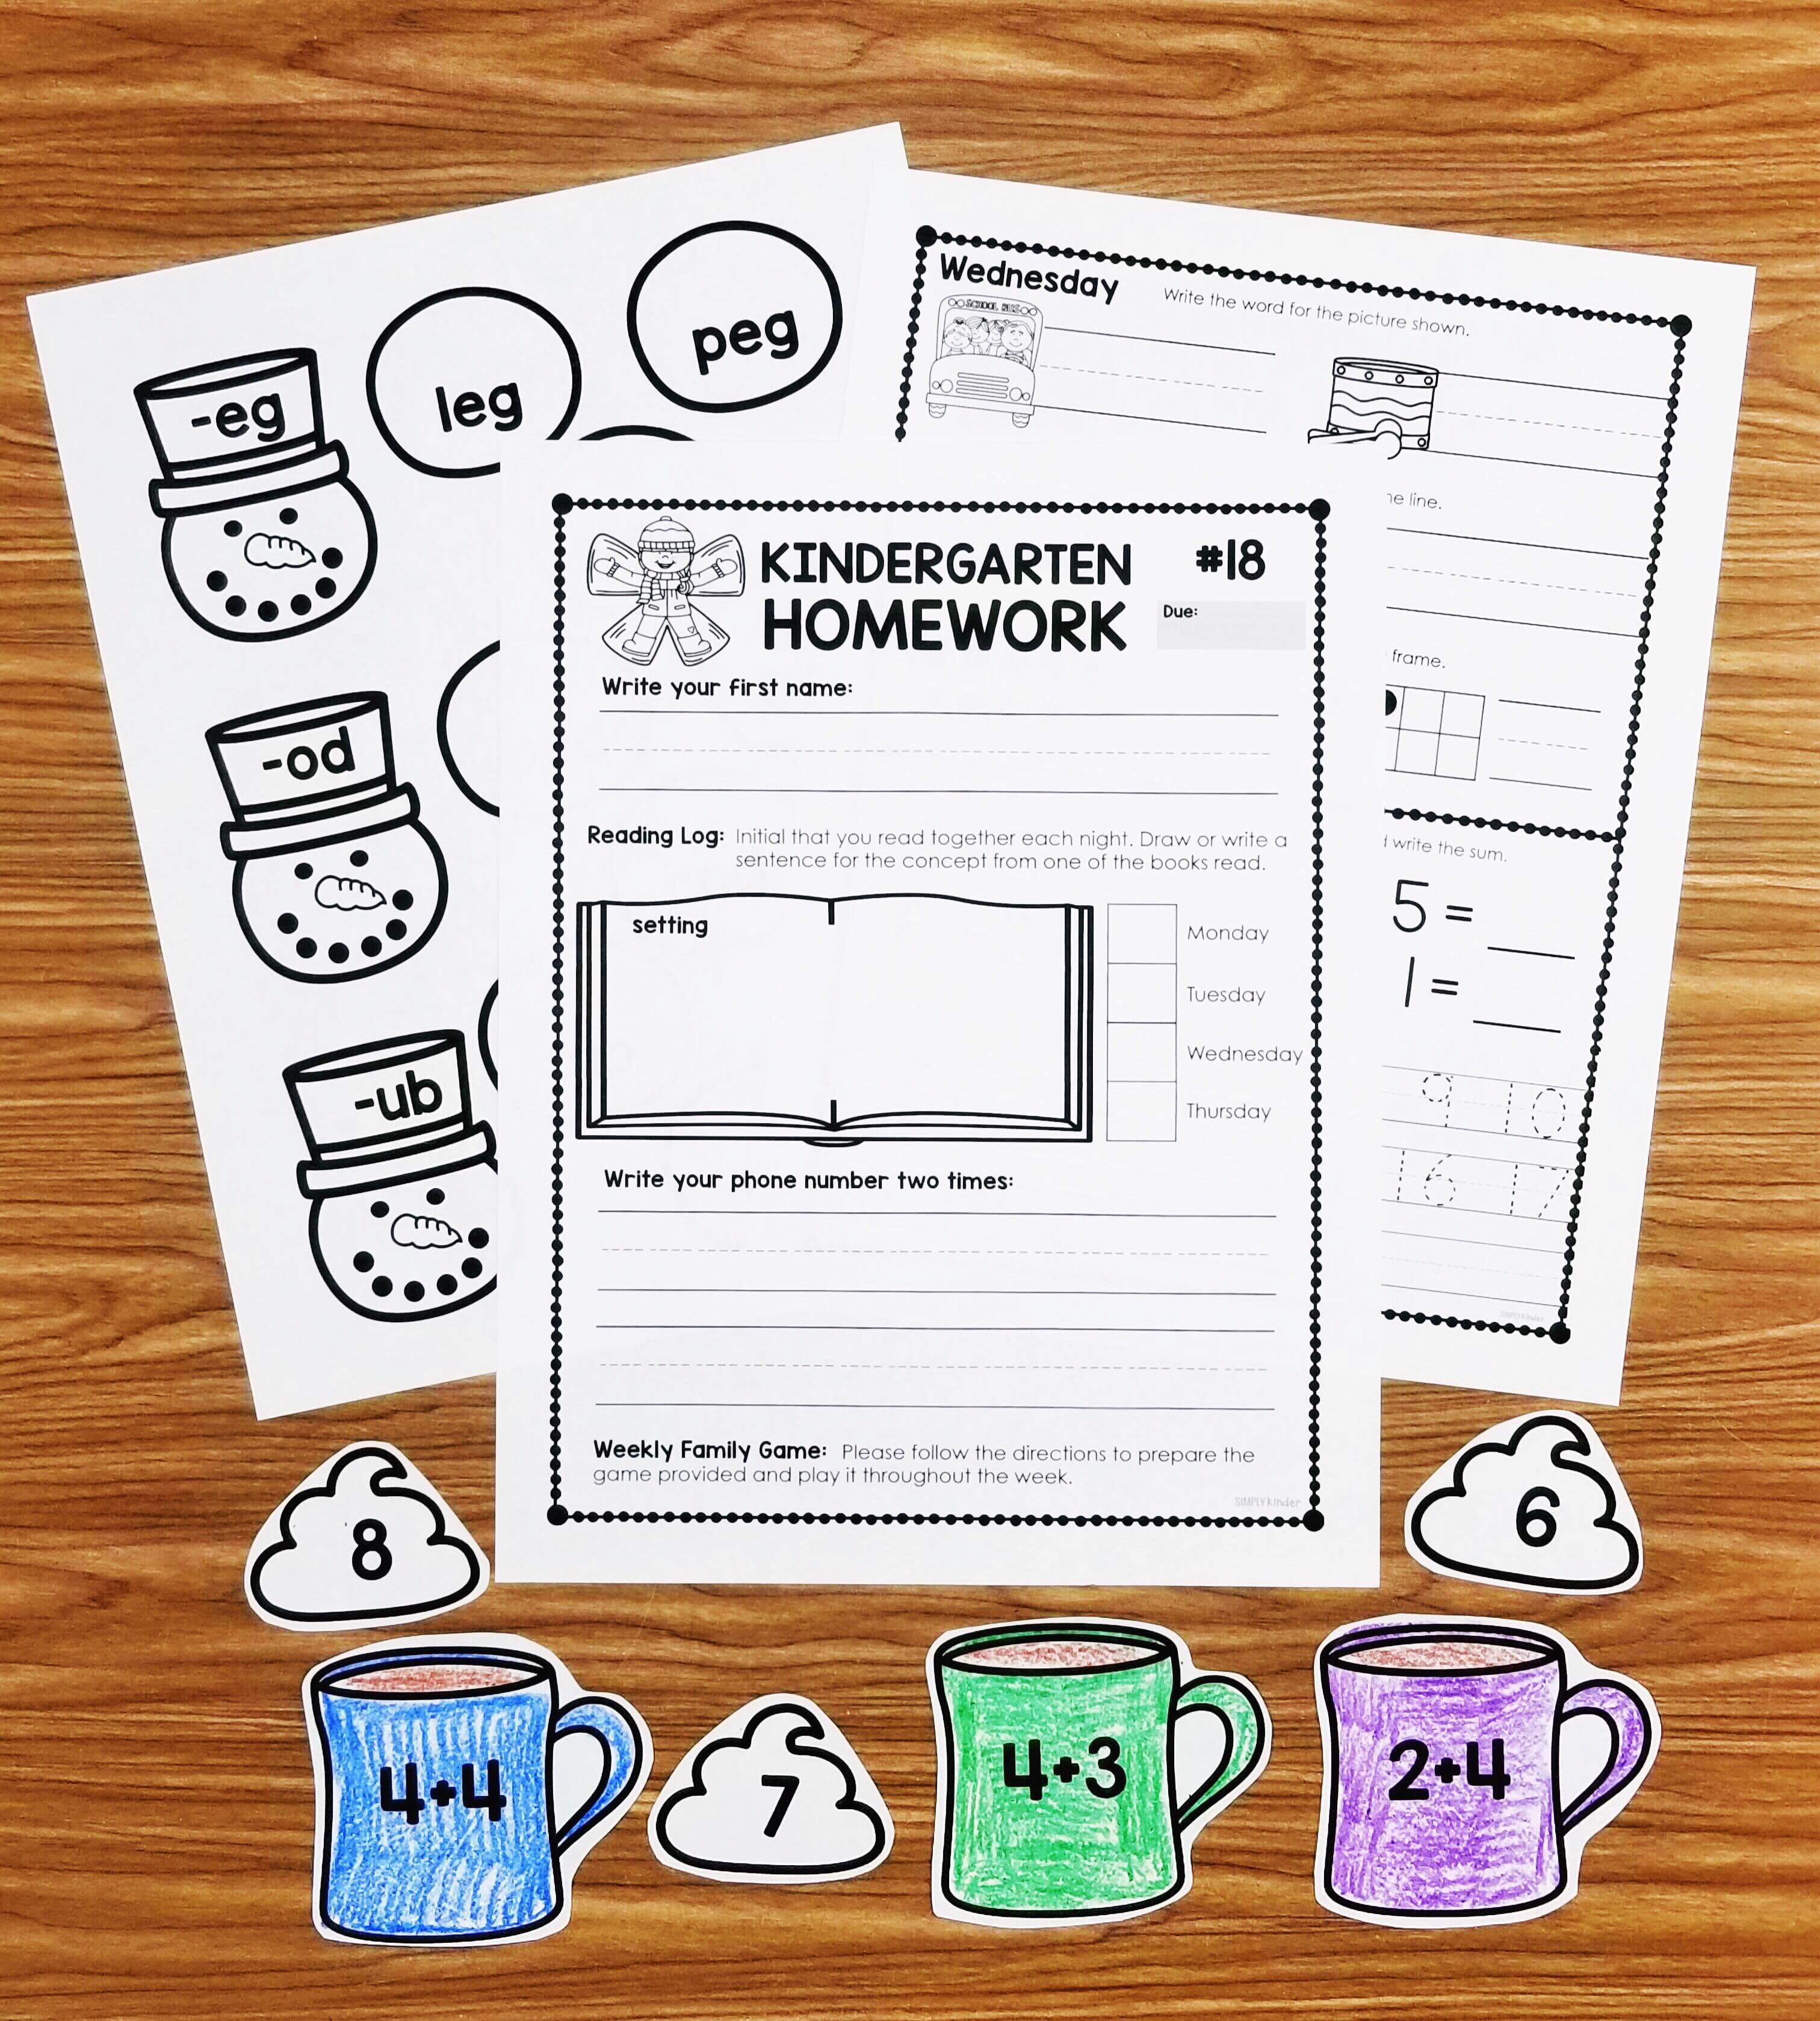 Kindergarten Homework with weekly family games and academic review! Try a week free at Simply Kinder!